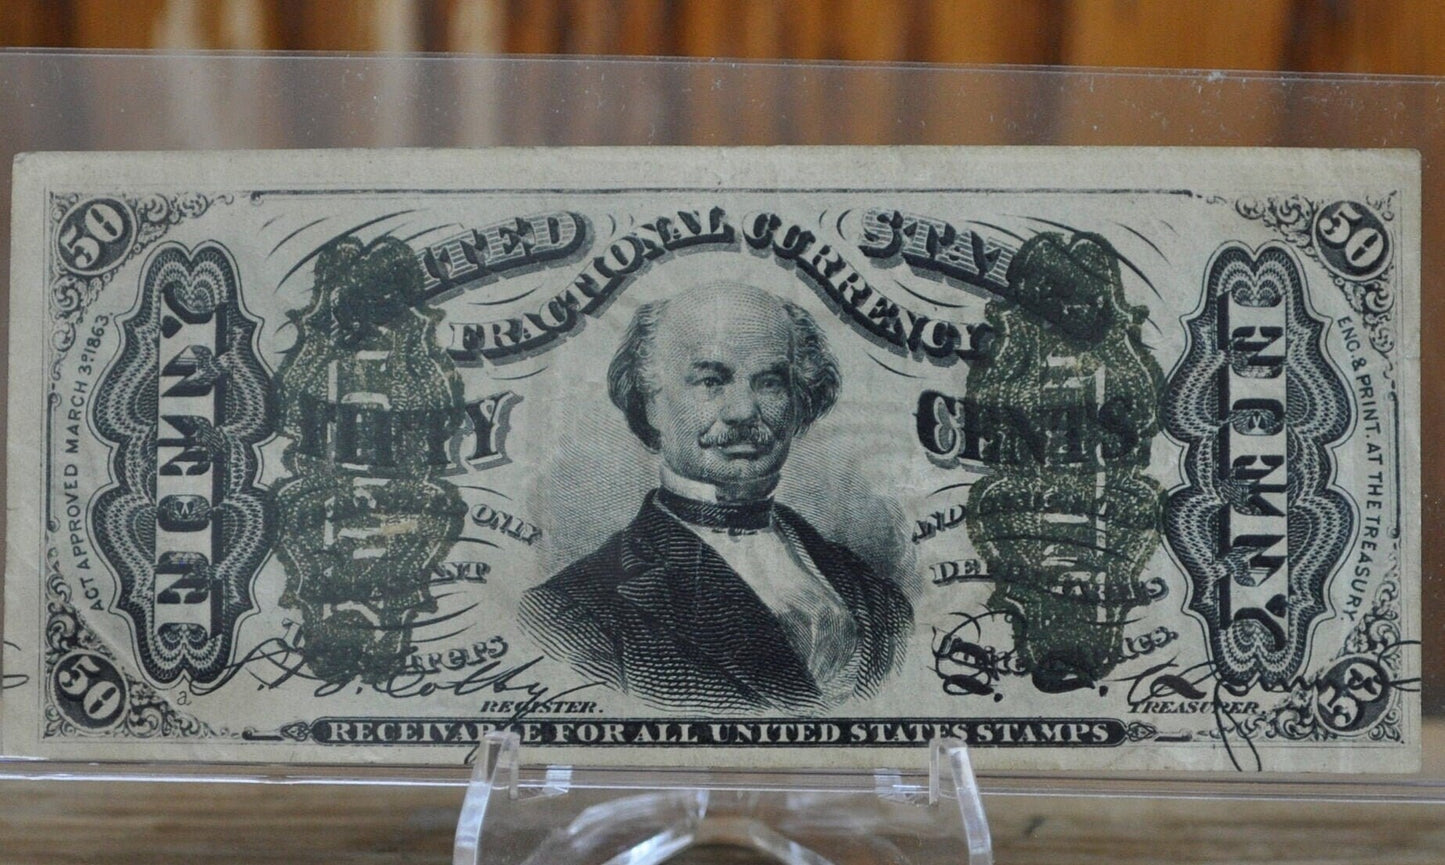 50 Cent Fractional Note Fr#1334 XF Grade / Condition - &quot;a&quot; on obverse, no surcharge, green reverse - Third Issue Fractional Note Fifty Cent